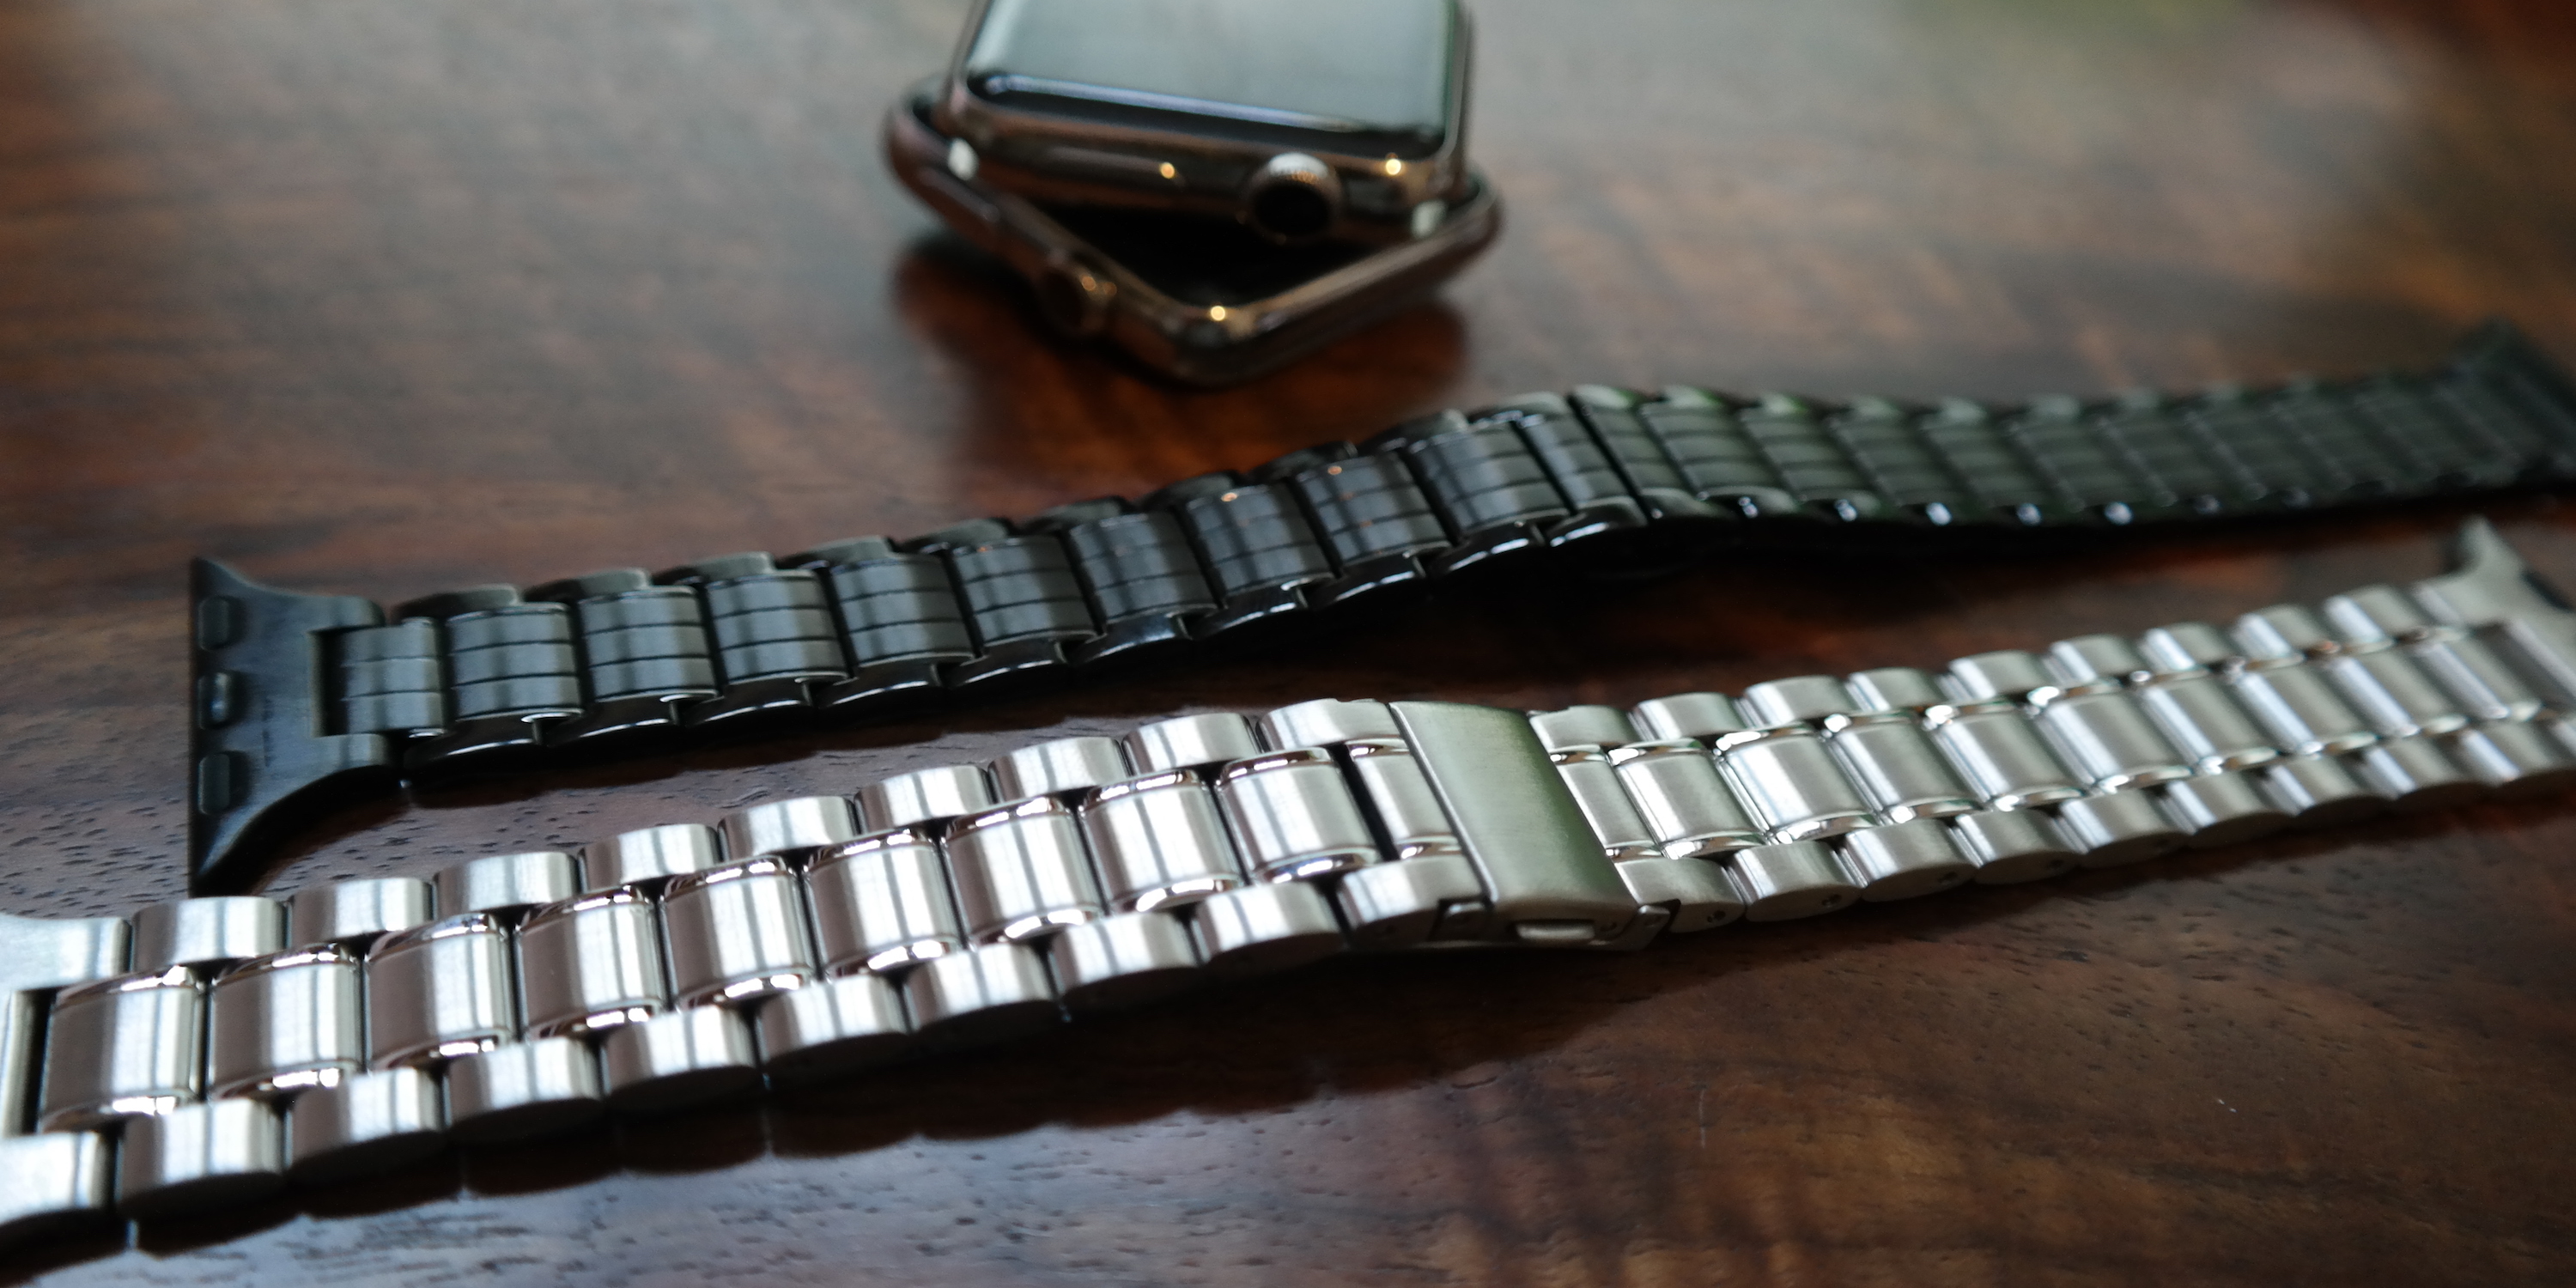 Review: Hyper's $69 stainless steel Apple Watch bands in silver